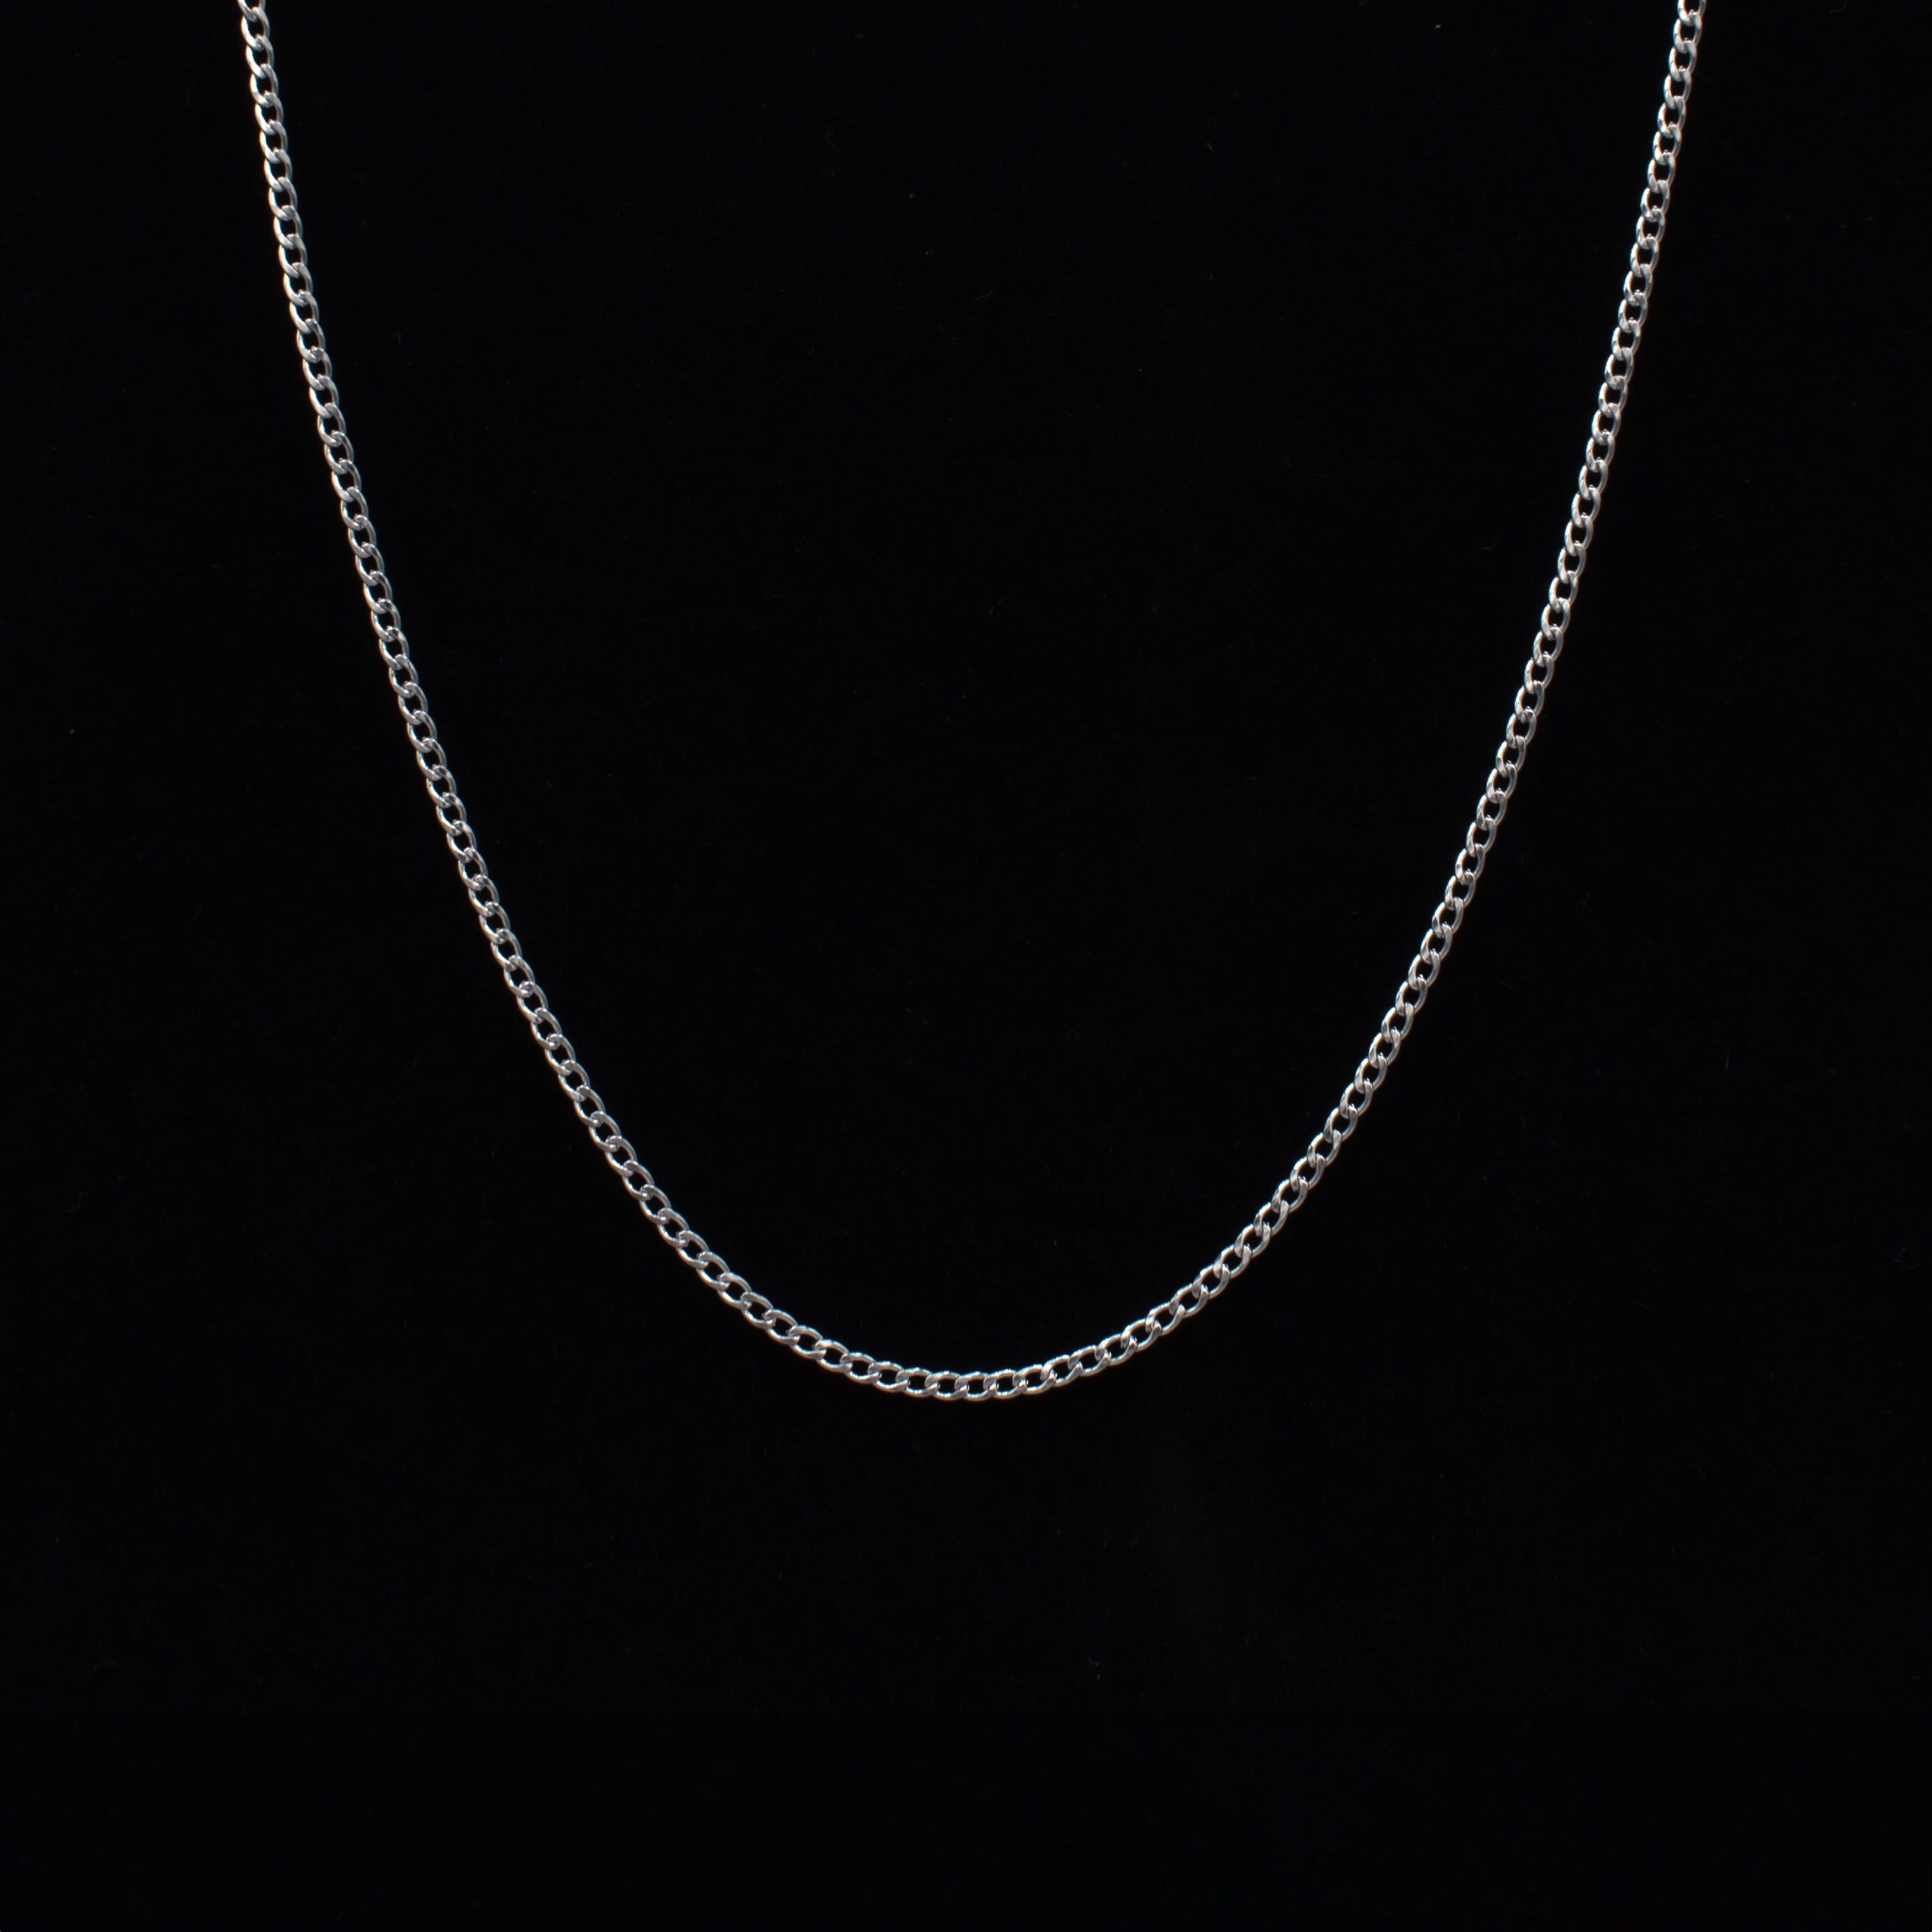 2mm stainless steel cuban necklace